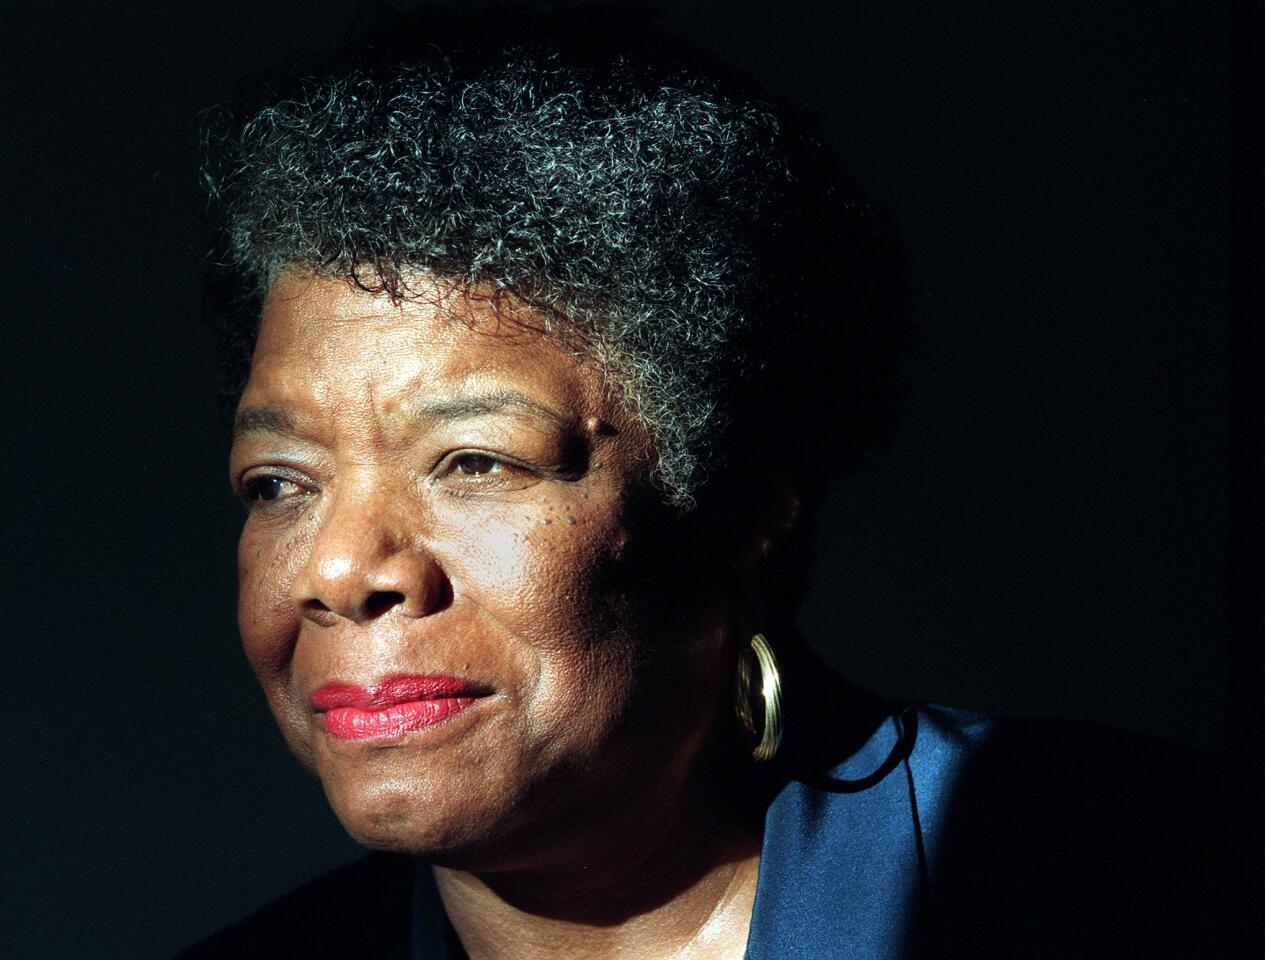 Maya Angelou, poet and author of the groundbreaking, bestselling memoir "I Know Why the Caged Bird Sings," died in May at age 86.